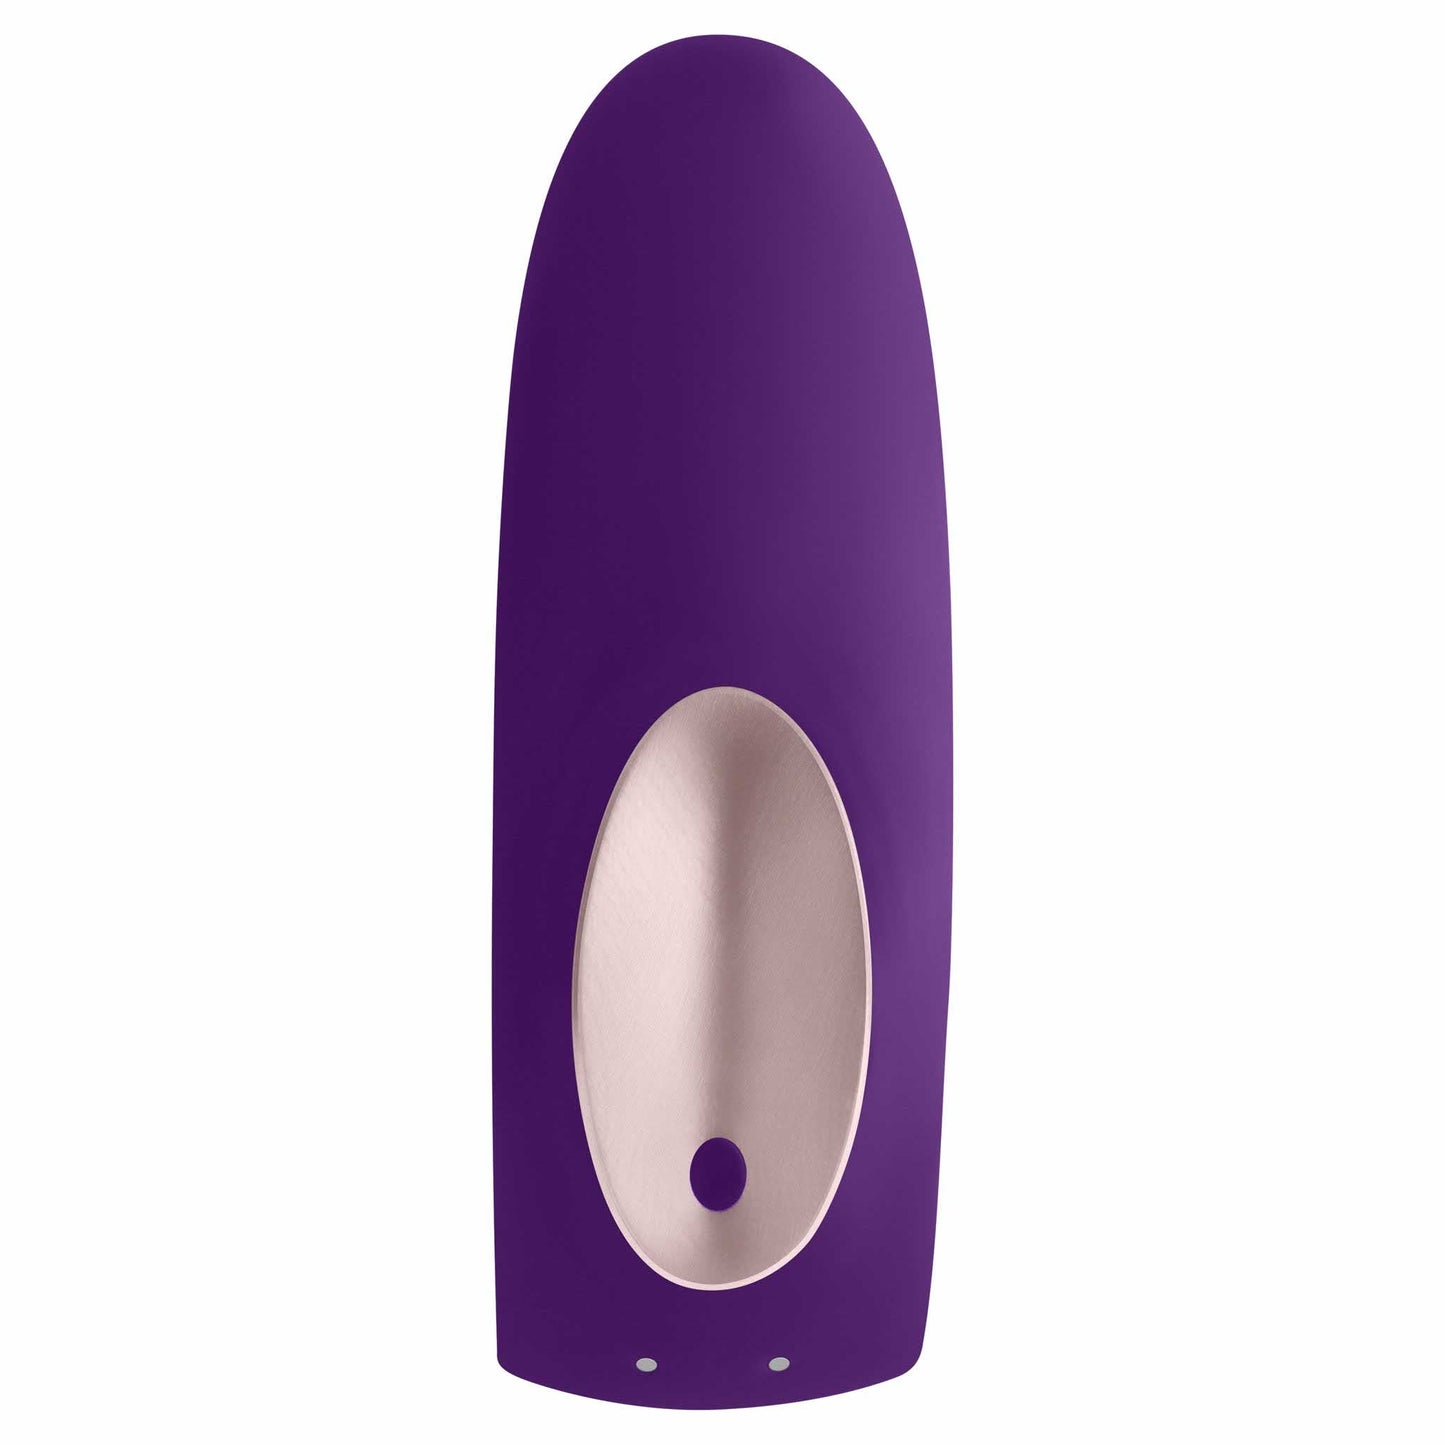 close-up of buttons on the satisfyer double plus remote control couples vibrator eisp04 purple